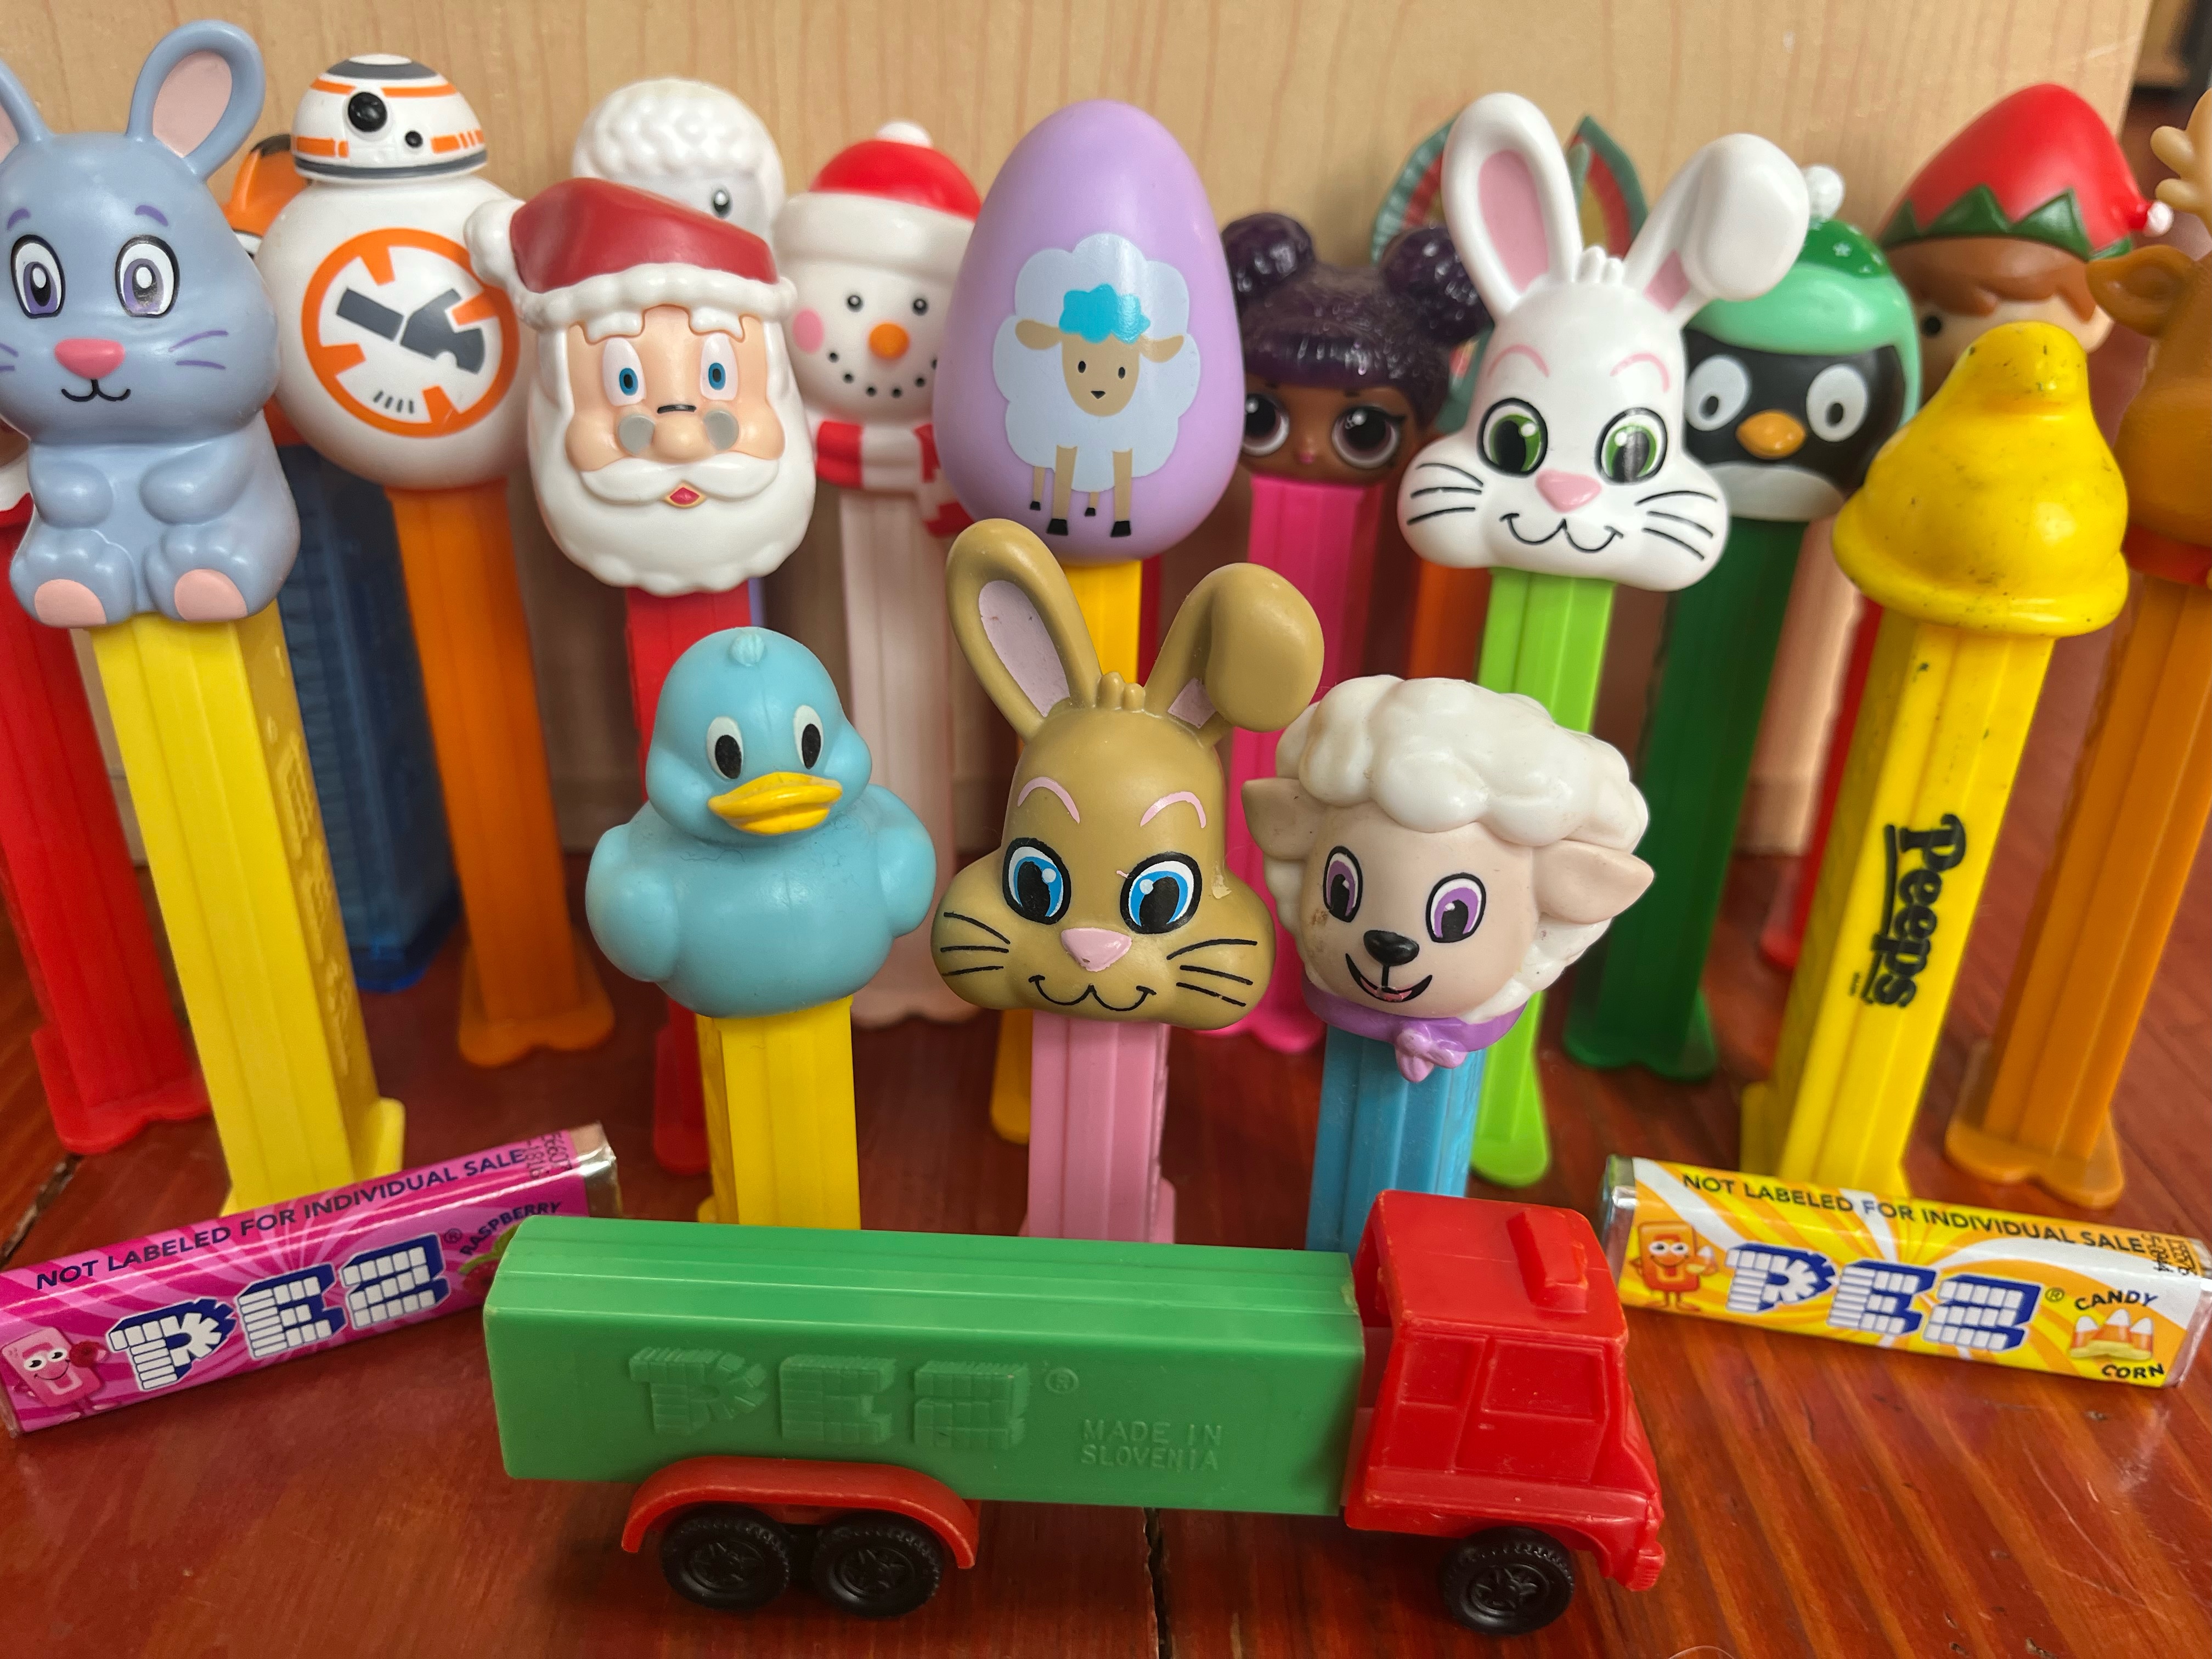 Pez dispensers and candy Easter, Christmas, Star wars, LOL and more